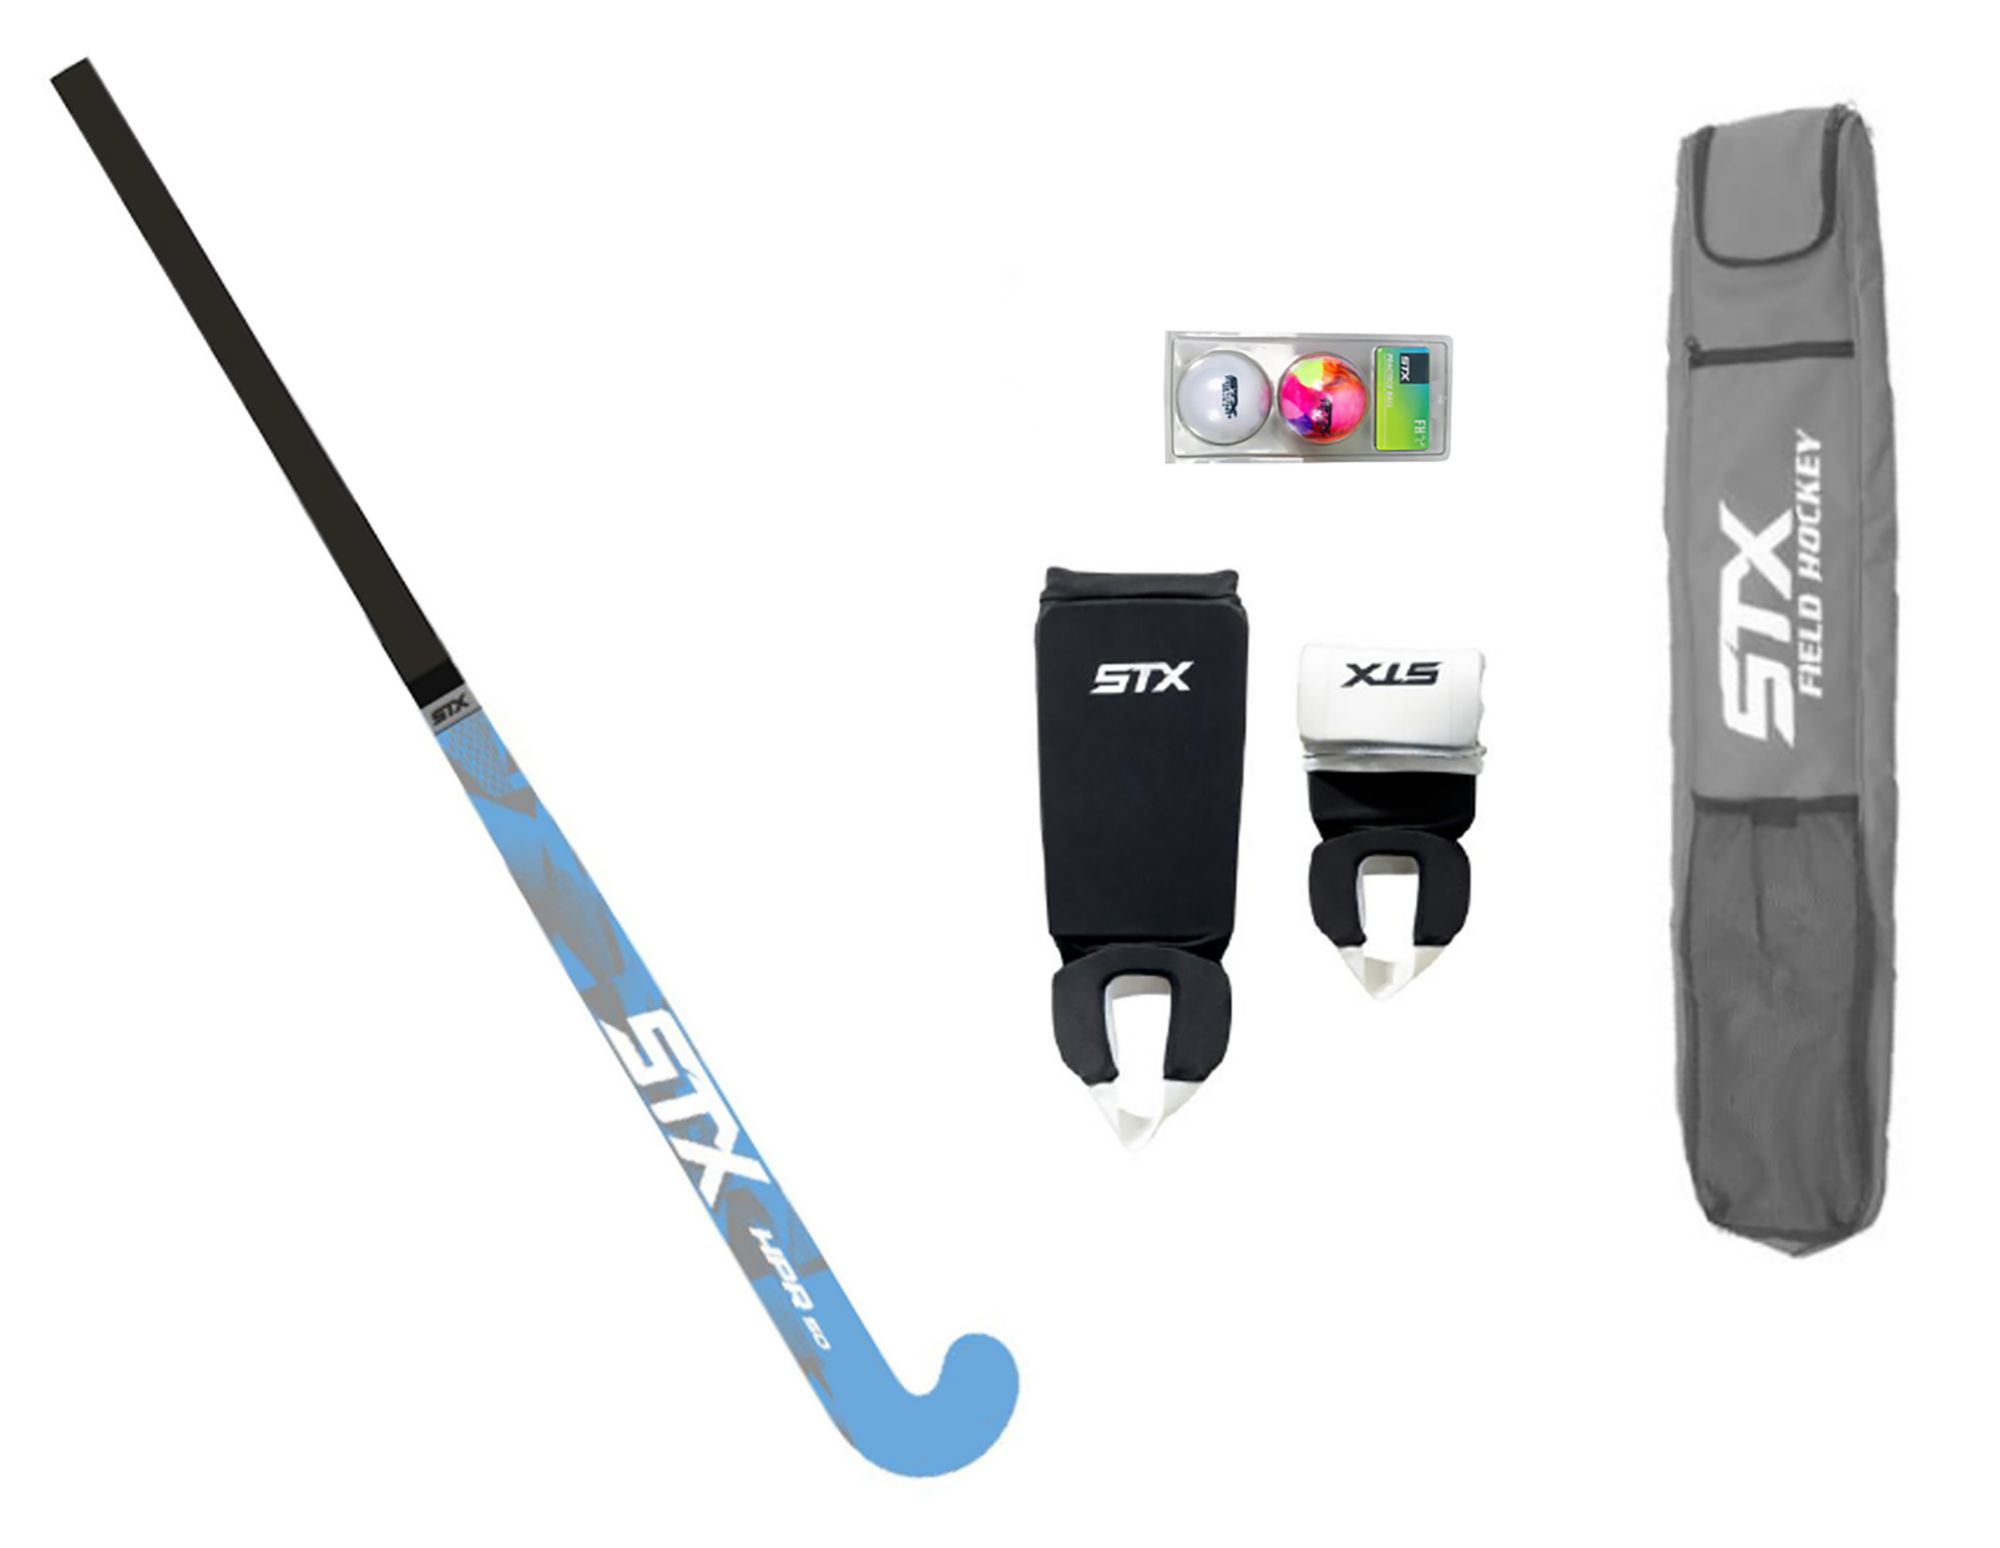 Hockey Equipment & Gear  Curbside Pickup Available at DICK'S